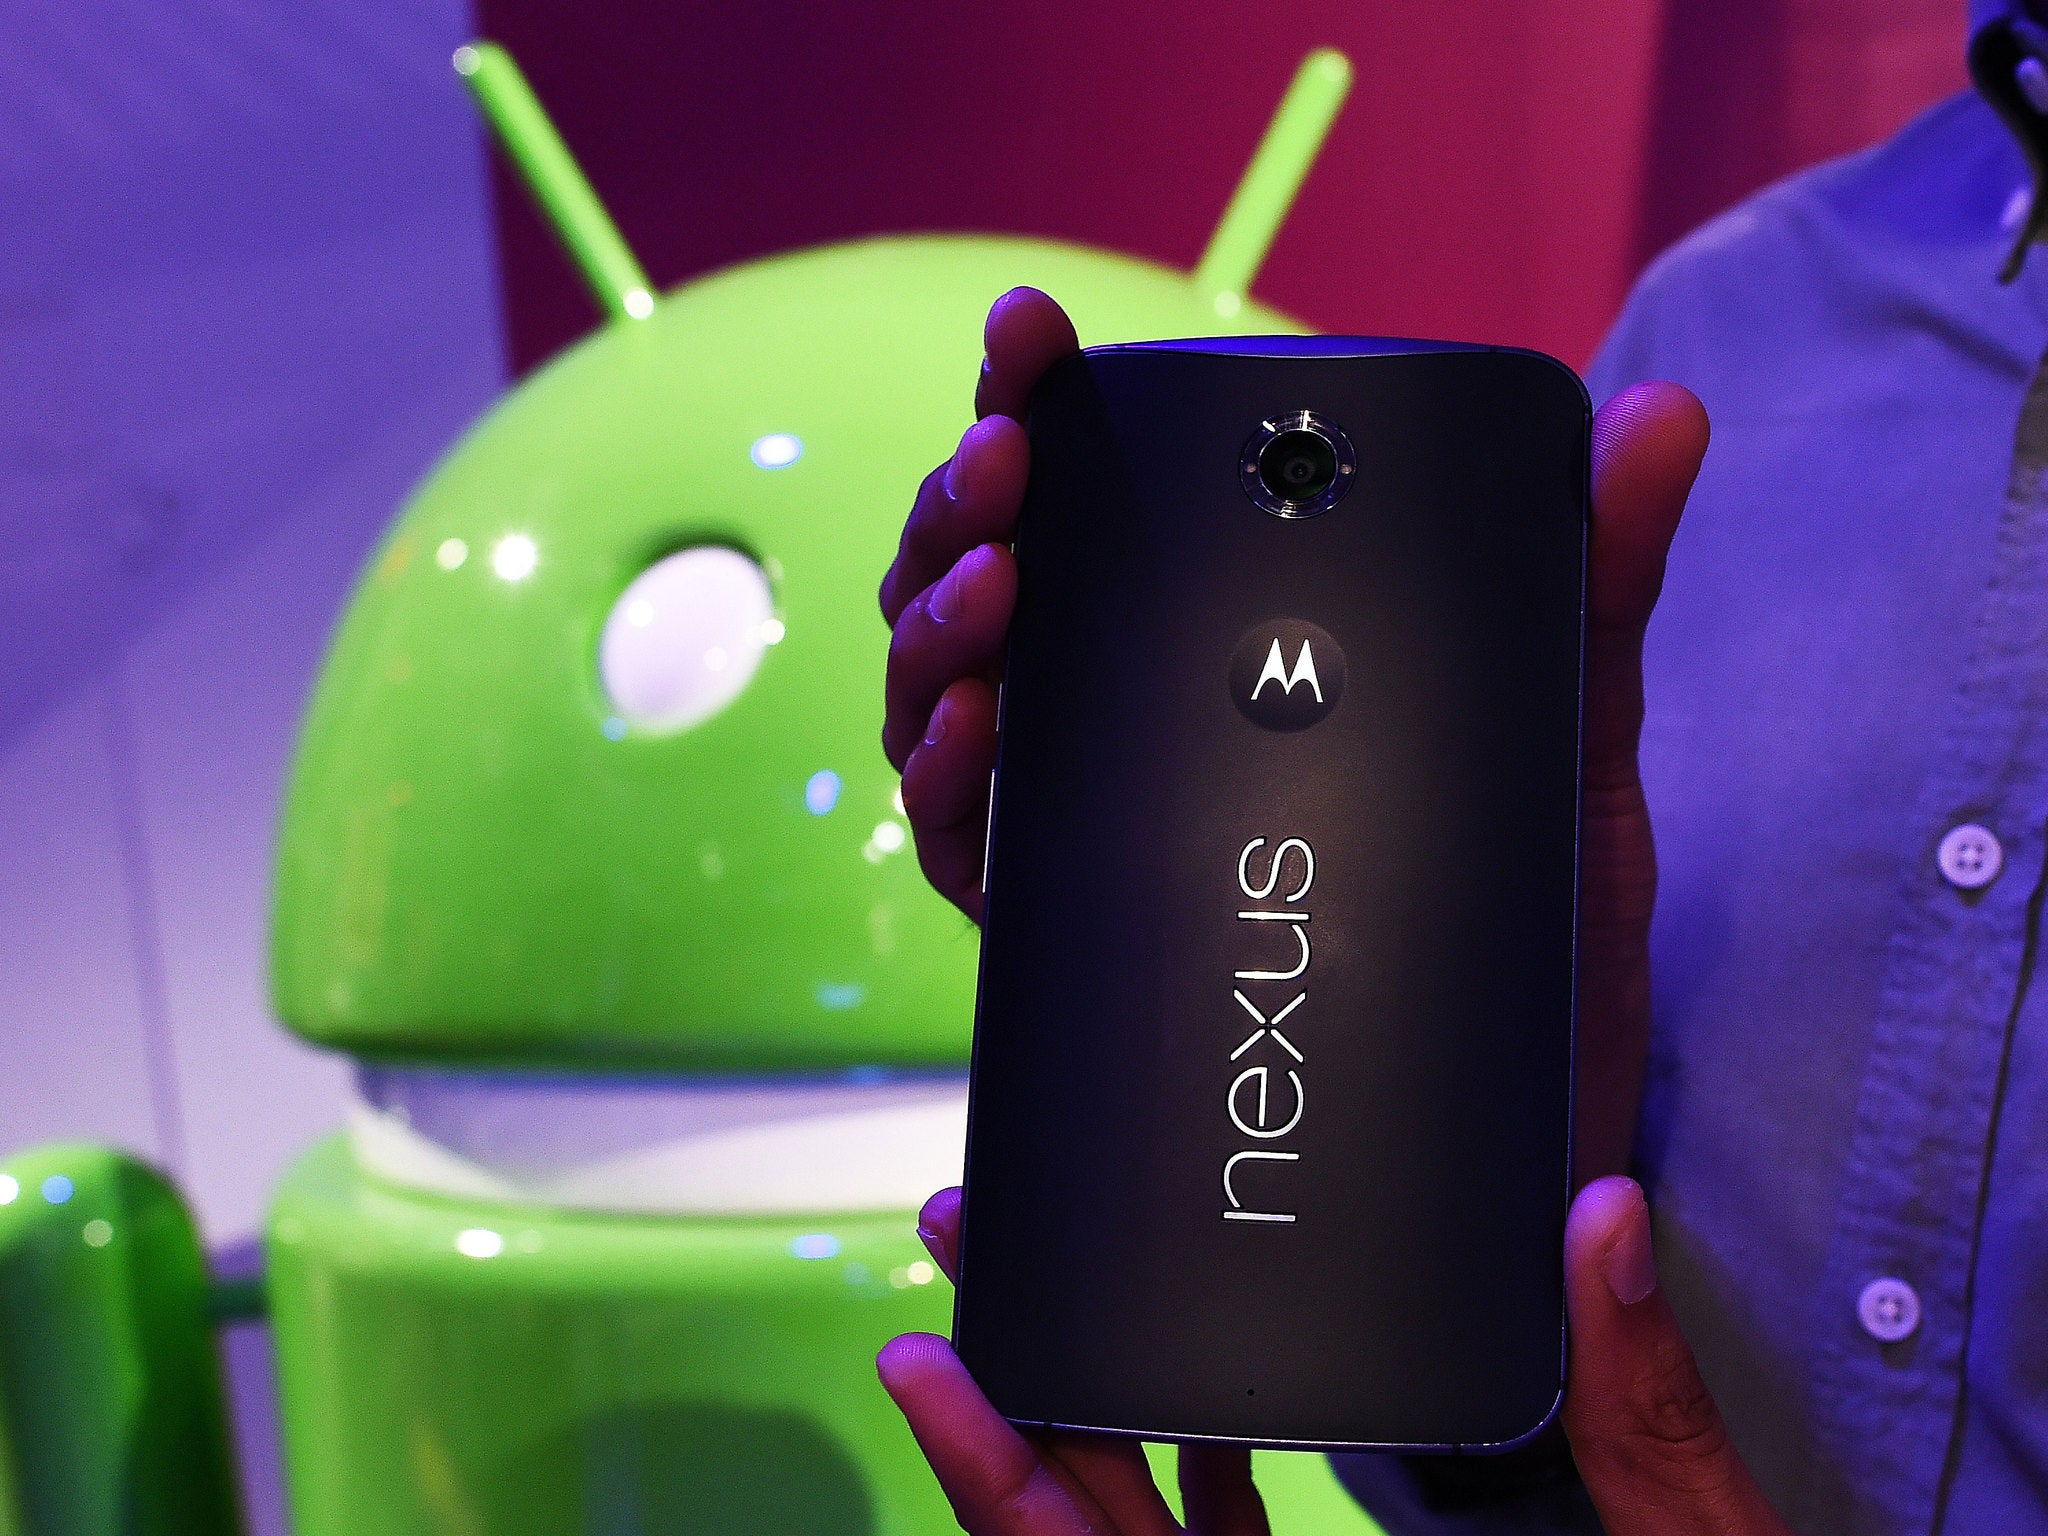 Older versions of Google's Nexus devices are among those hit by the slowdowns